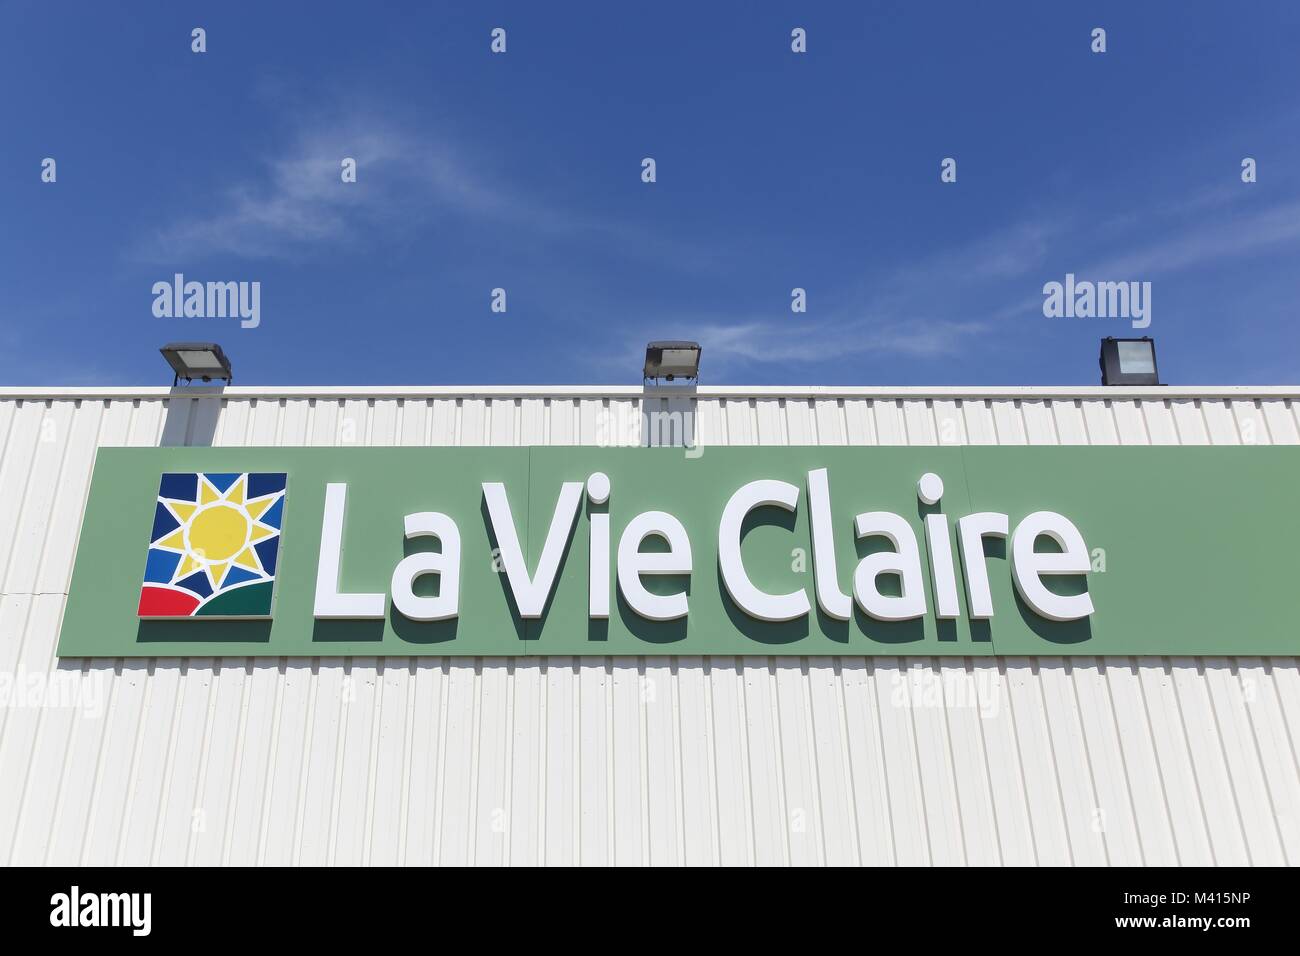 Genay, France - May 28, 2017: La vie claire logo on wall. La Vie Claire is a French chain of health and bio product stores Stock Photo